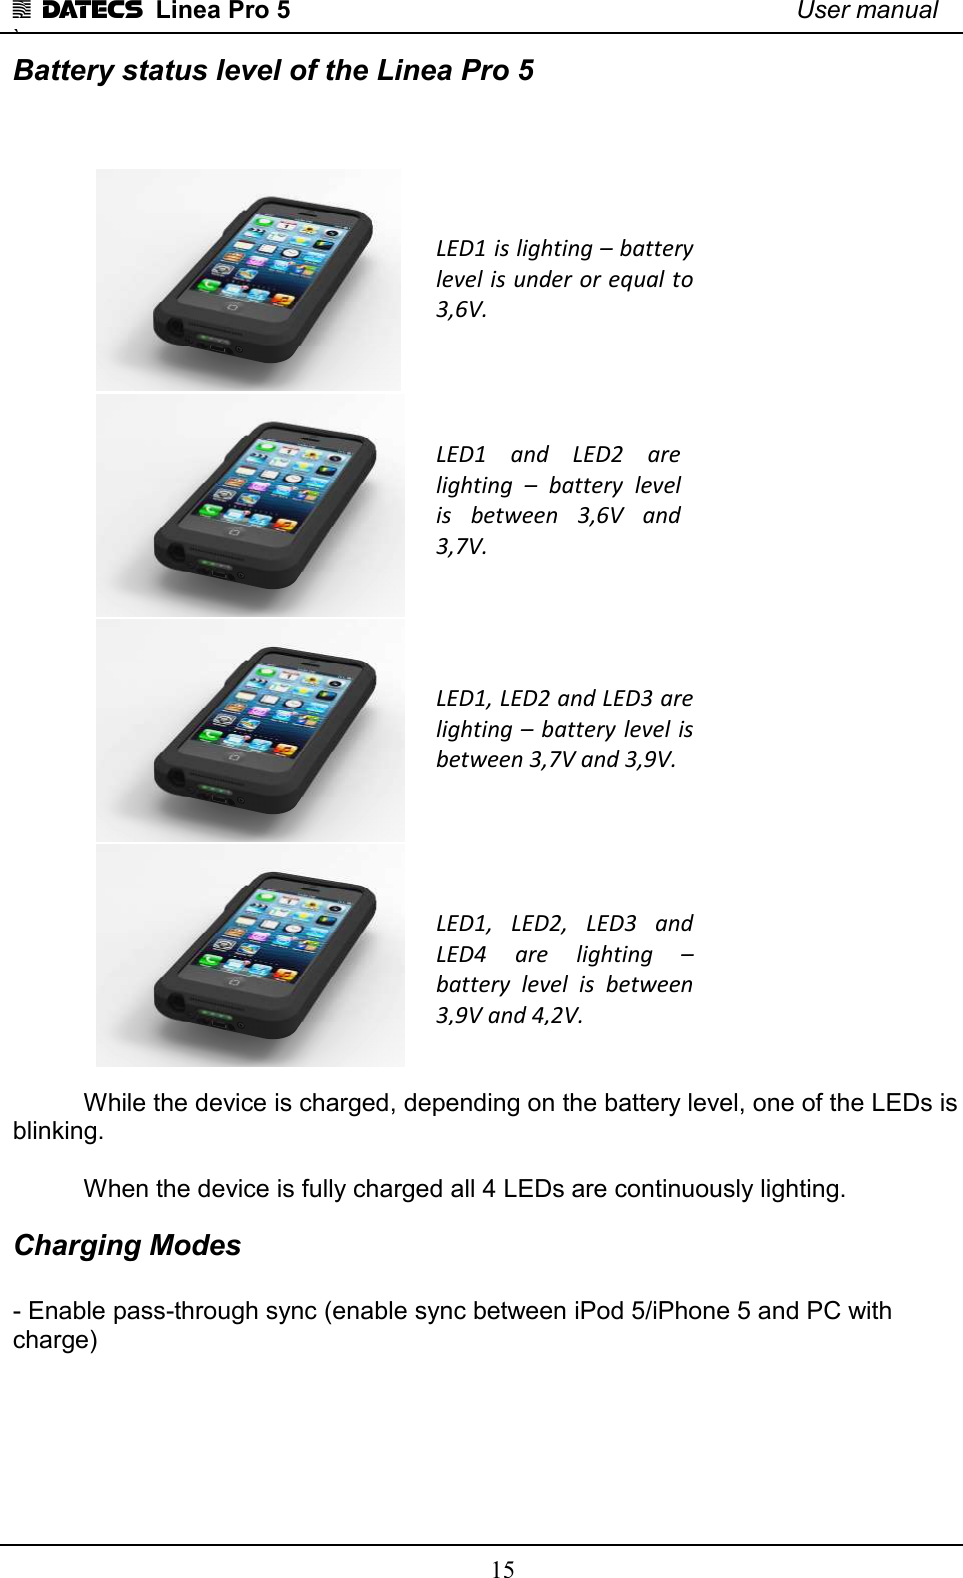 1 DATECS  Linea Pro 5    User manual `    15 Battery status level of the Linea Pro 5    While the device is charged, depending on the battery level, one of the LEDs is blinking.  When the device is fully charged all 4 LEDs are continuously lighting. Charging Modes  - Enable pass-through sync (enable sync between iPod 5/iPhone 5 and PC with charge)     LED1  and  LED2  are lighting  –  battery  level is  between  3,6V  and 3,7V.  LED1 is lighting – battery level is under or equal to 3,6V. LED1, LED2 and LED3 are lighting – battery  level is between 3,7V and 3,9V.  LED1,  LED2,  LED3  and LED4  are  lighting  – battery  level  is  between 3,9V and 4,2V. 